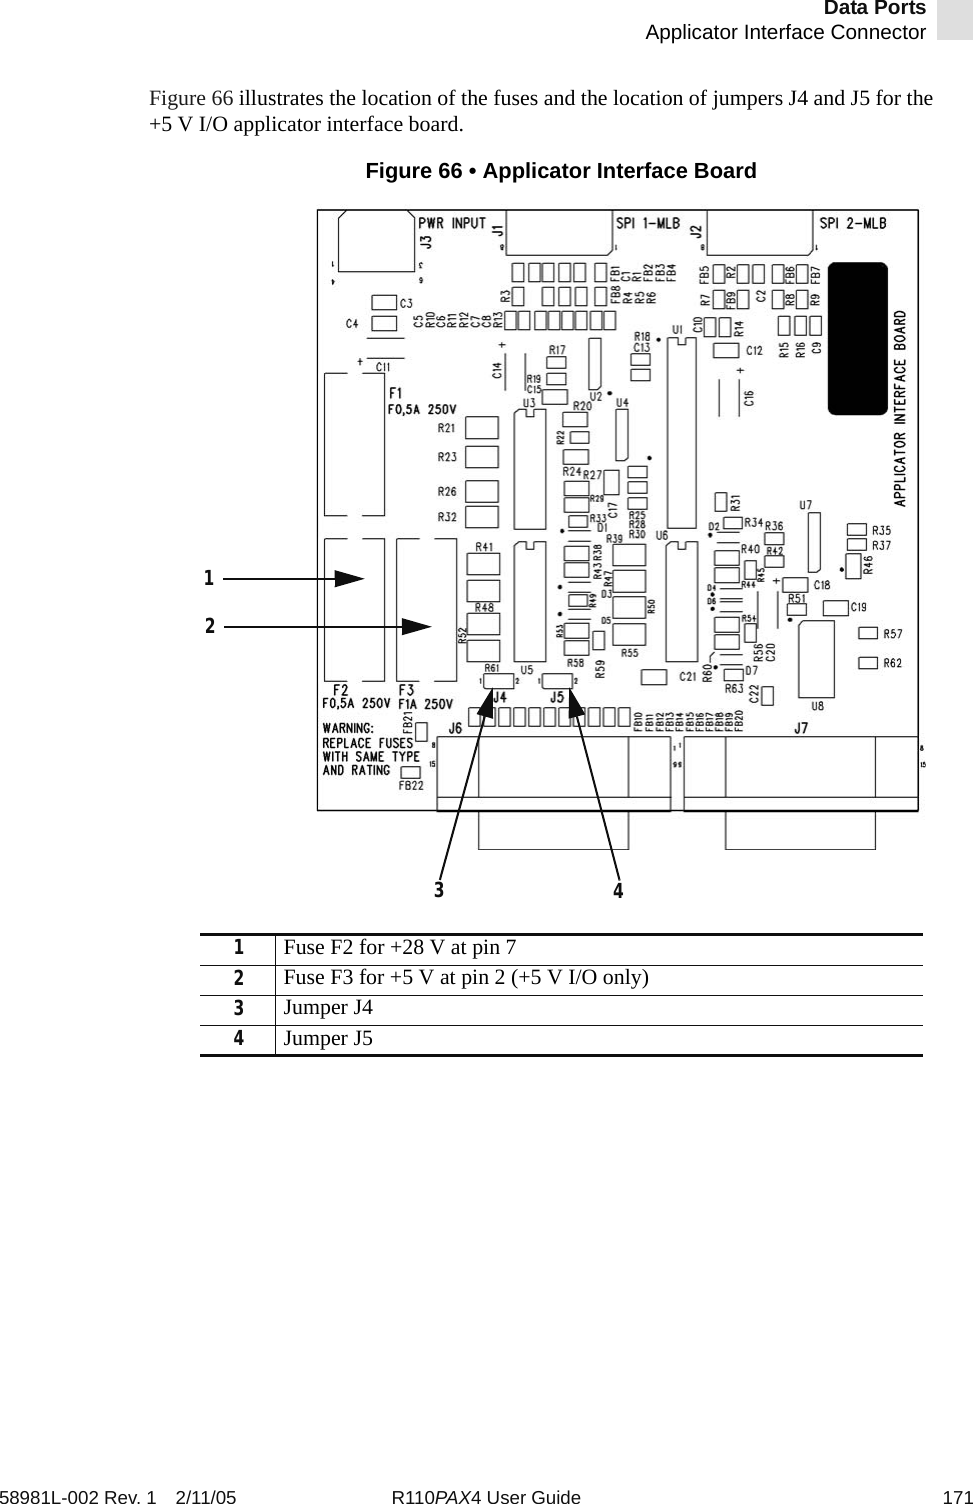 Data PortsApplicator Interface Connector58981L-002 Rev. 1 2/11/05 R110PAX4 User Guide 171Figure 66 illustrates the location of the fuses and the location of jumpers J4 and J5 for the +5 V I/O applicator interface board.Figure 66 • Applicator Interface Board1Fuse F2 for +28 V at pin 72Fuse F3 for +5 V at pin 2 (+5 V I/O only)3Jumper J44Jumper J51234